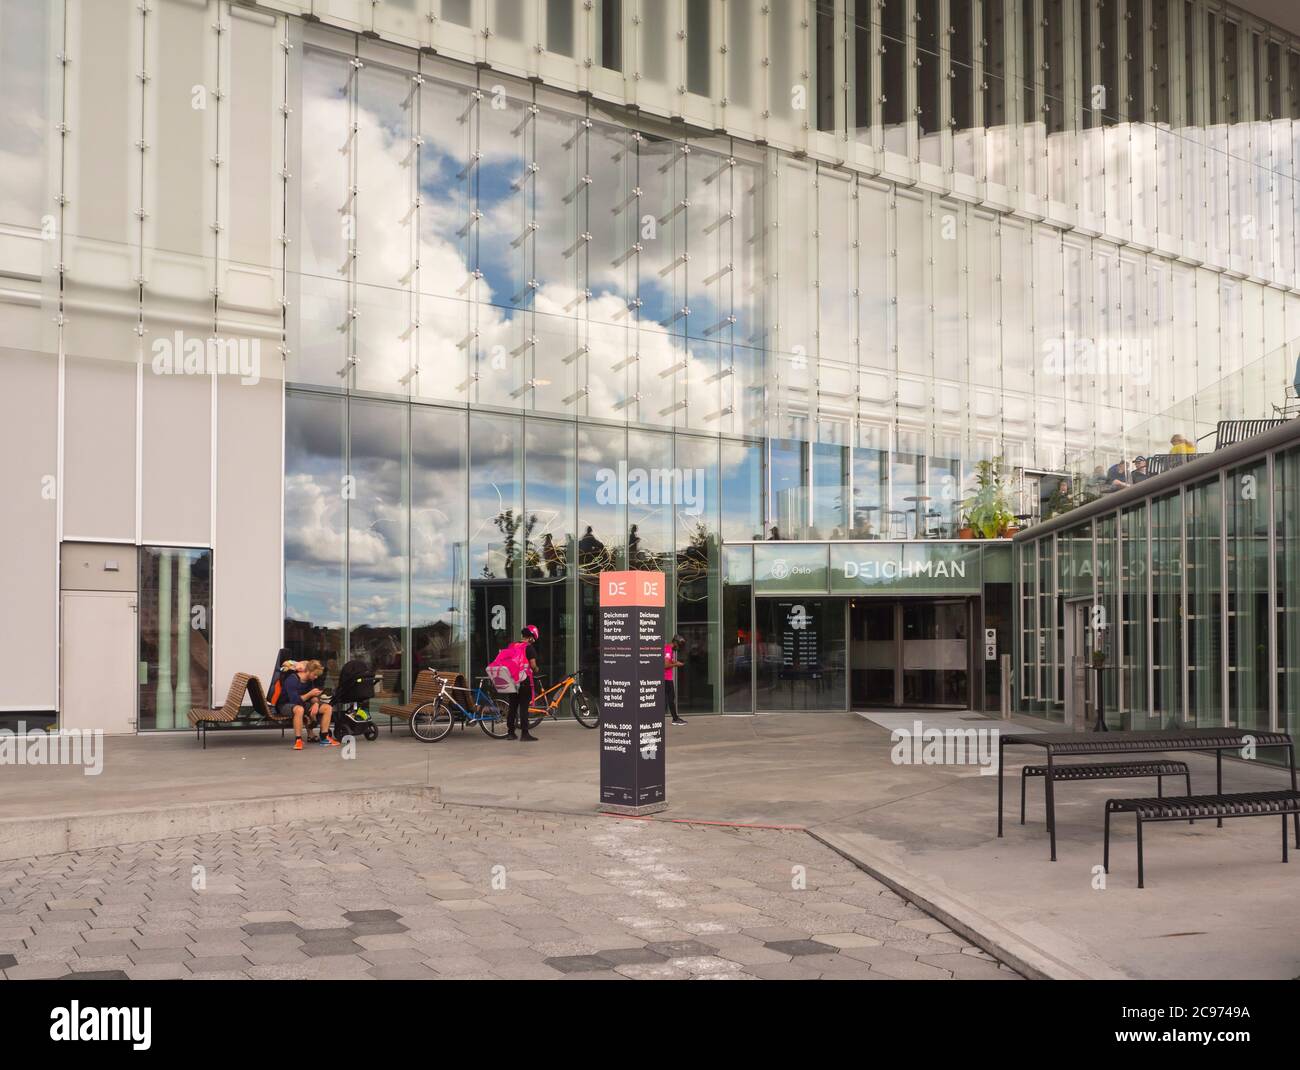 Oslo Norway got a new public library building in 2020. Deichman Bjørvika, Facade with main entrance reflecting the sky Stock Photo